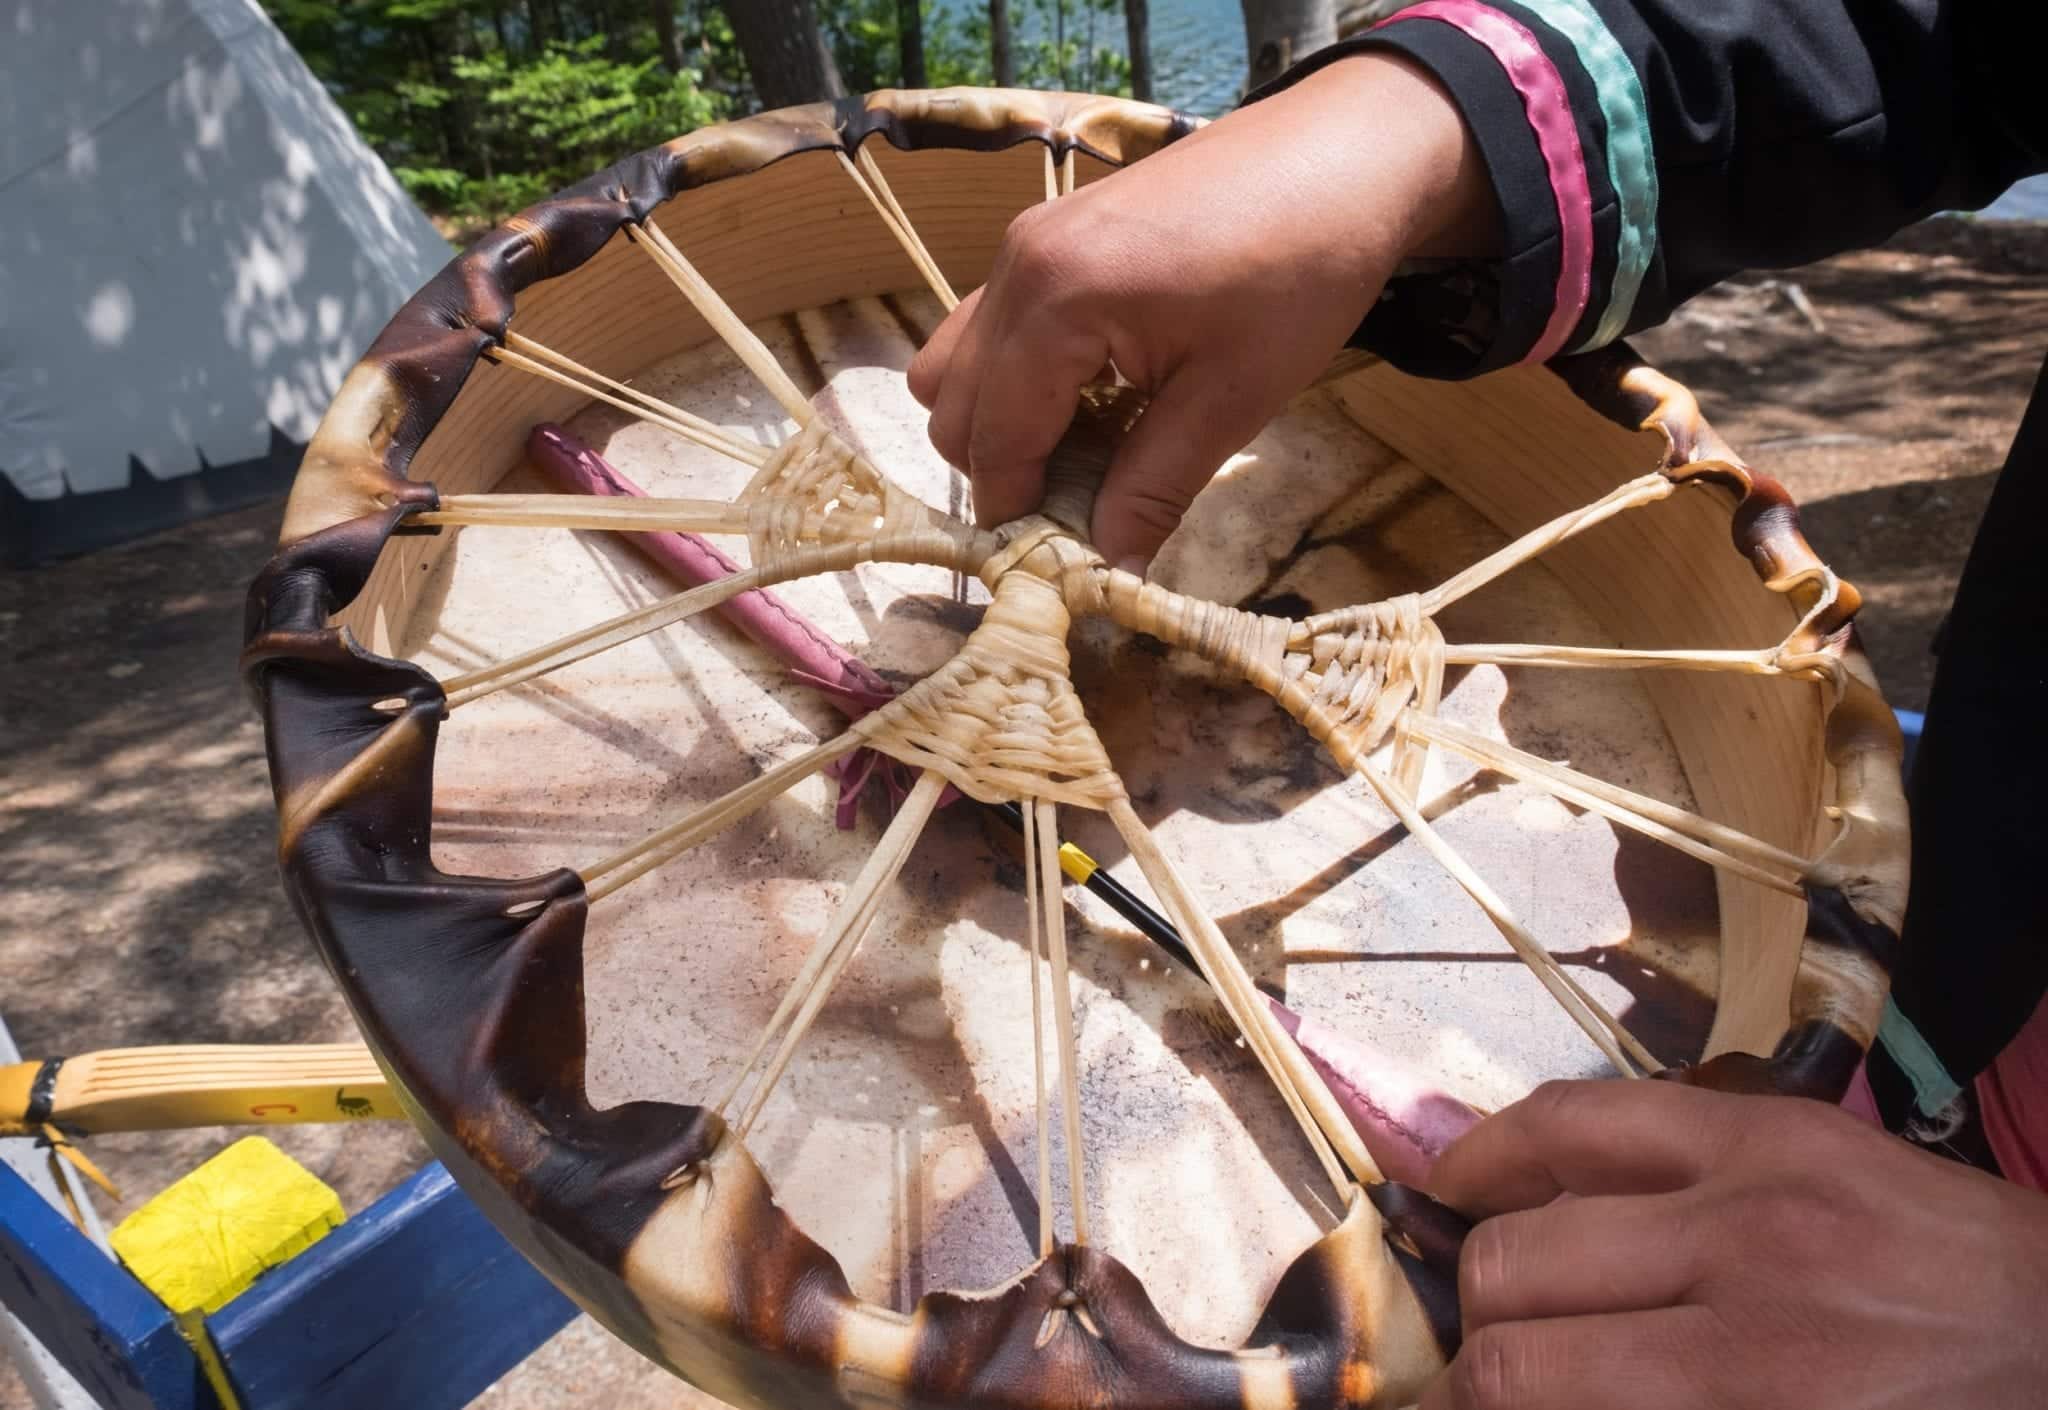 A traditional Mi'kmaq drum made from woven sinew, and a woman's hand on top.